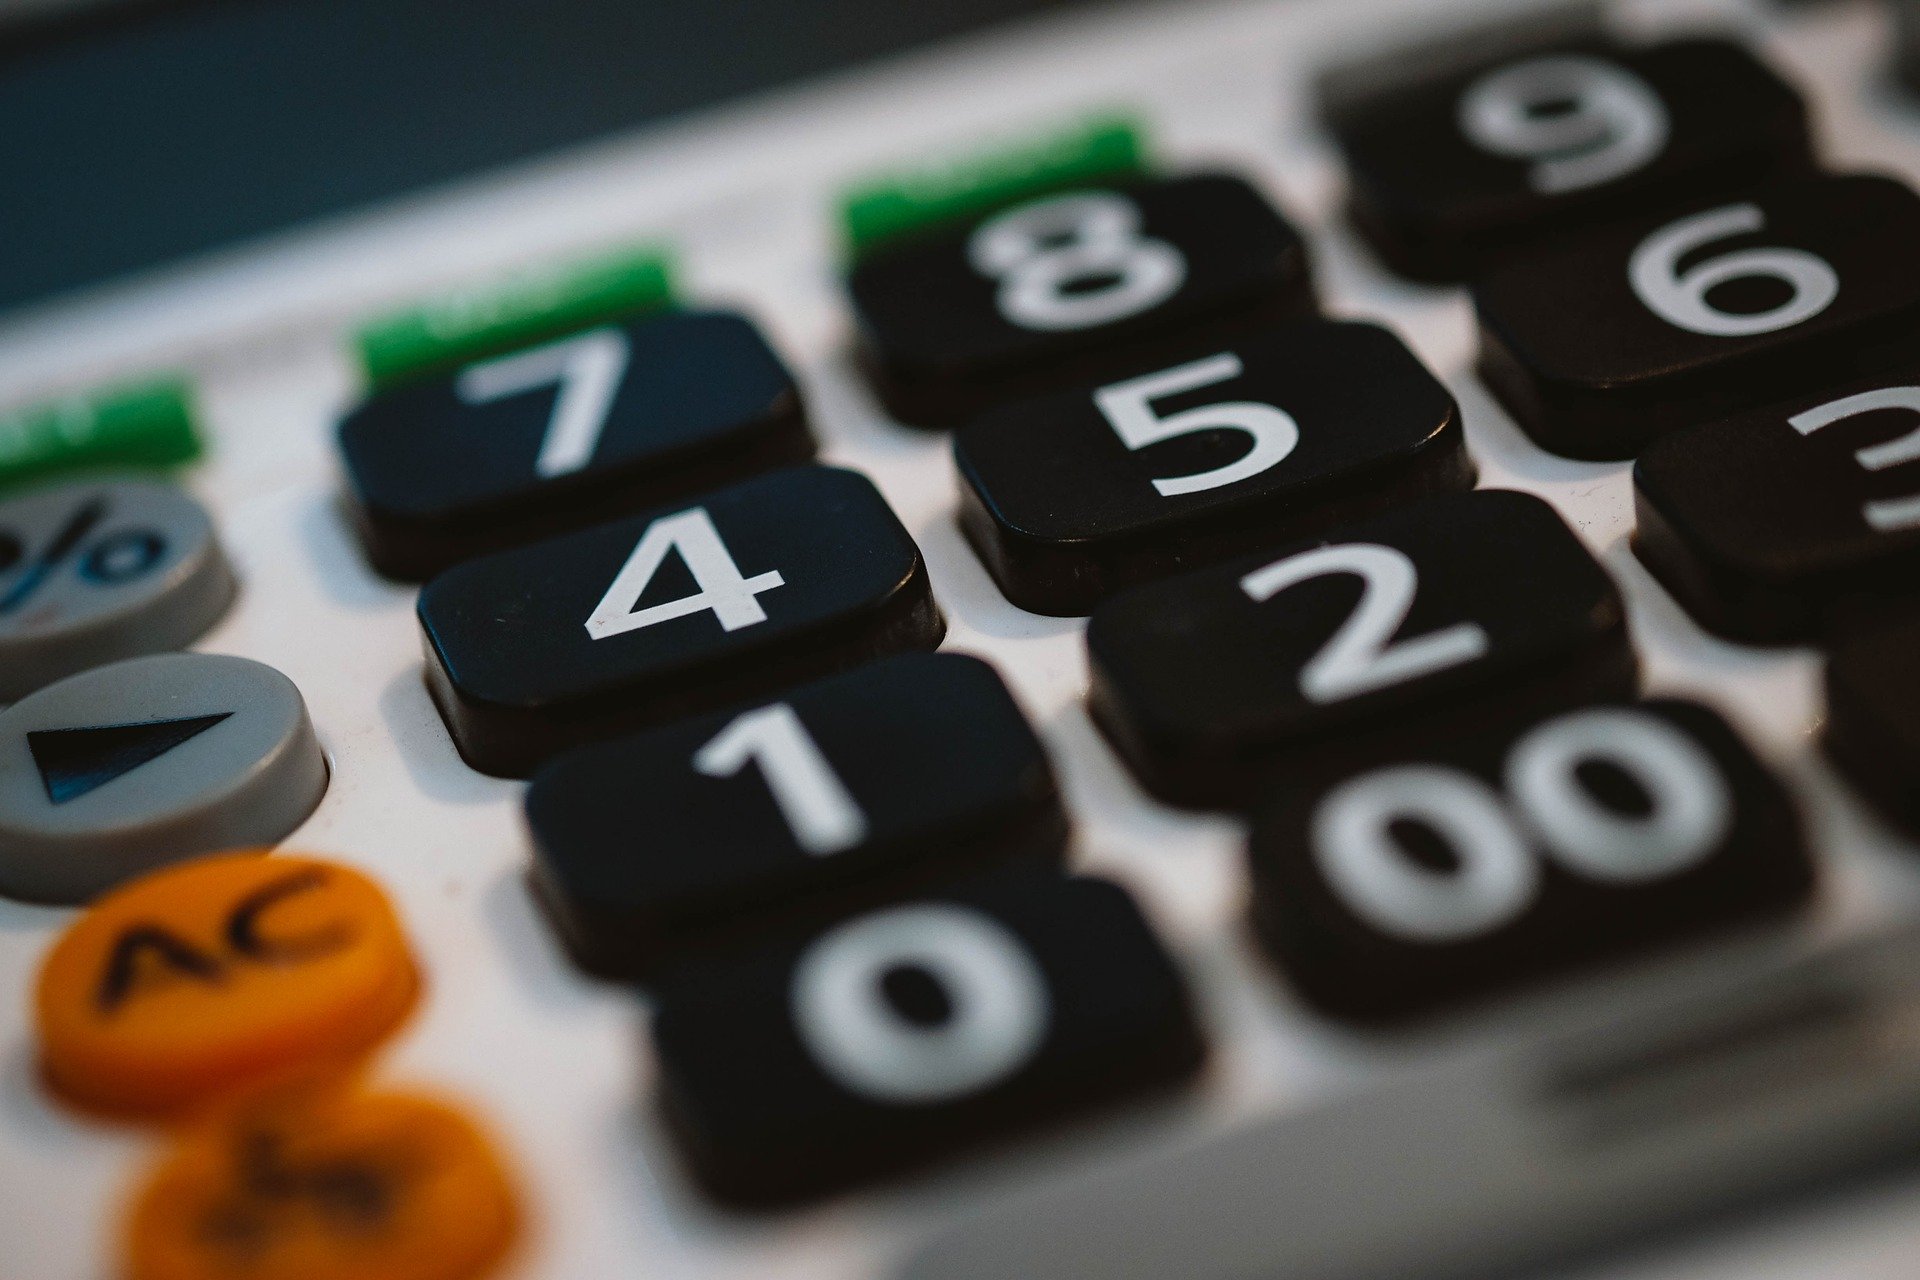 Close-up view of a calculator.